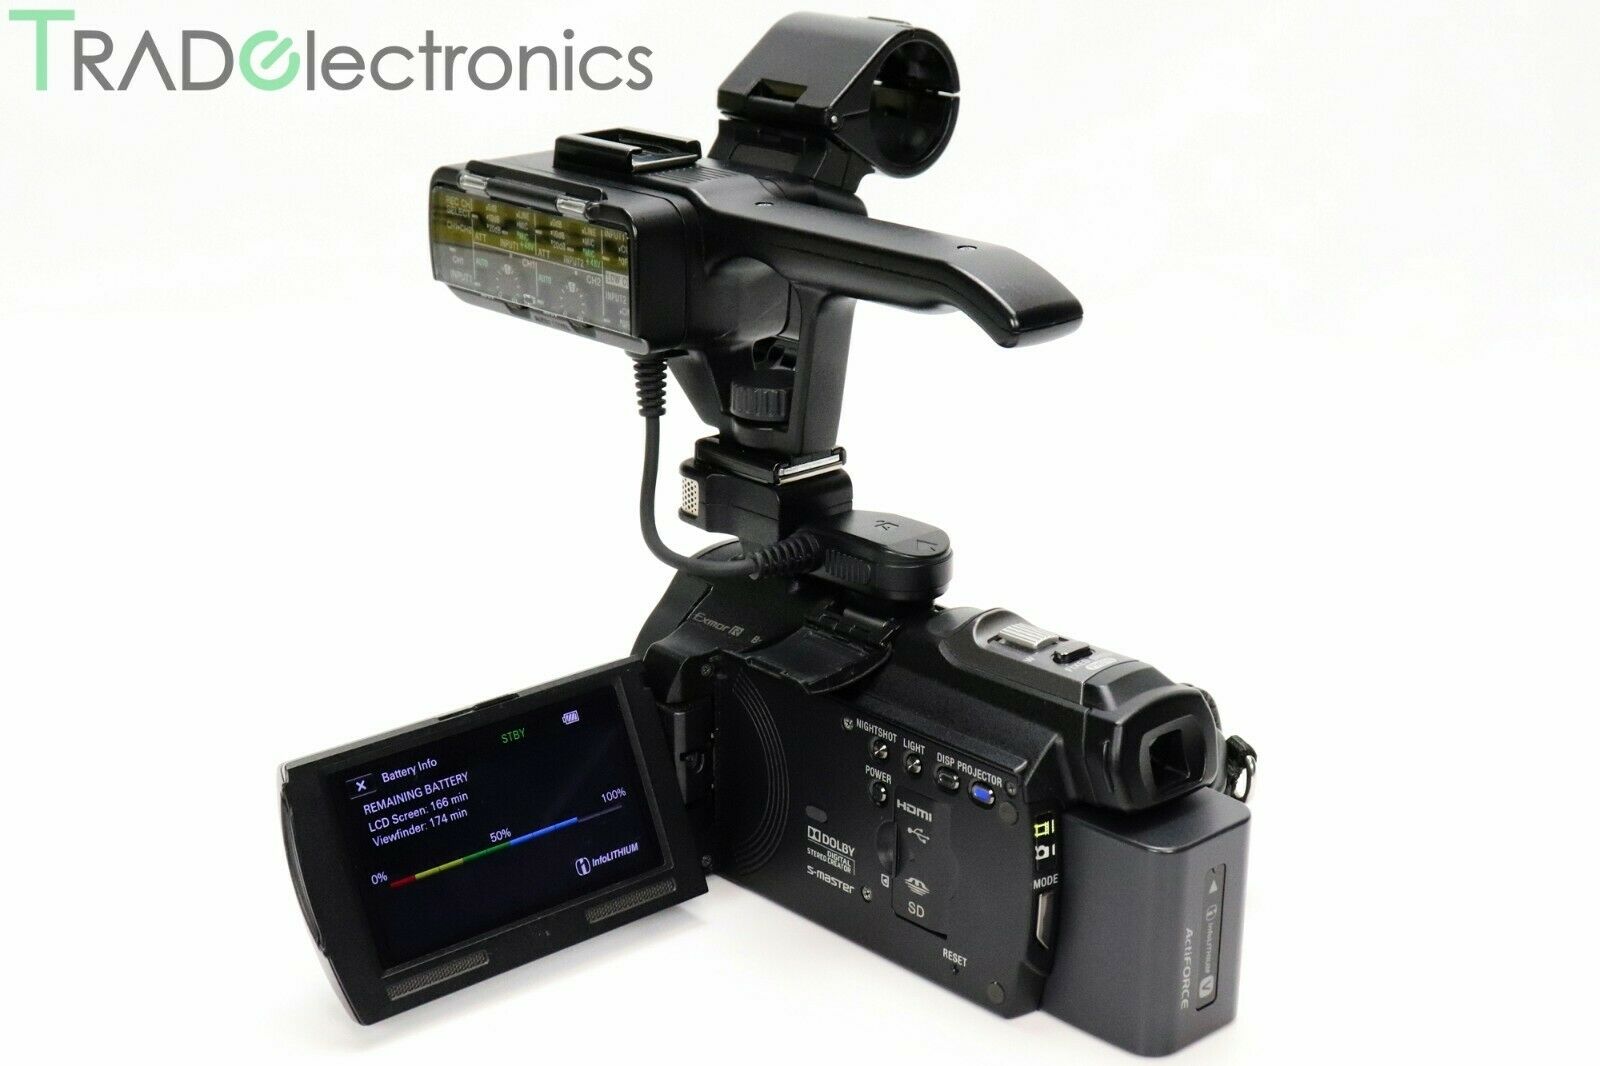 Sony NXCAM HXR NX30 FHD Video Camera Preowned Tradelectronics